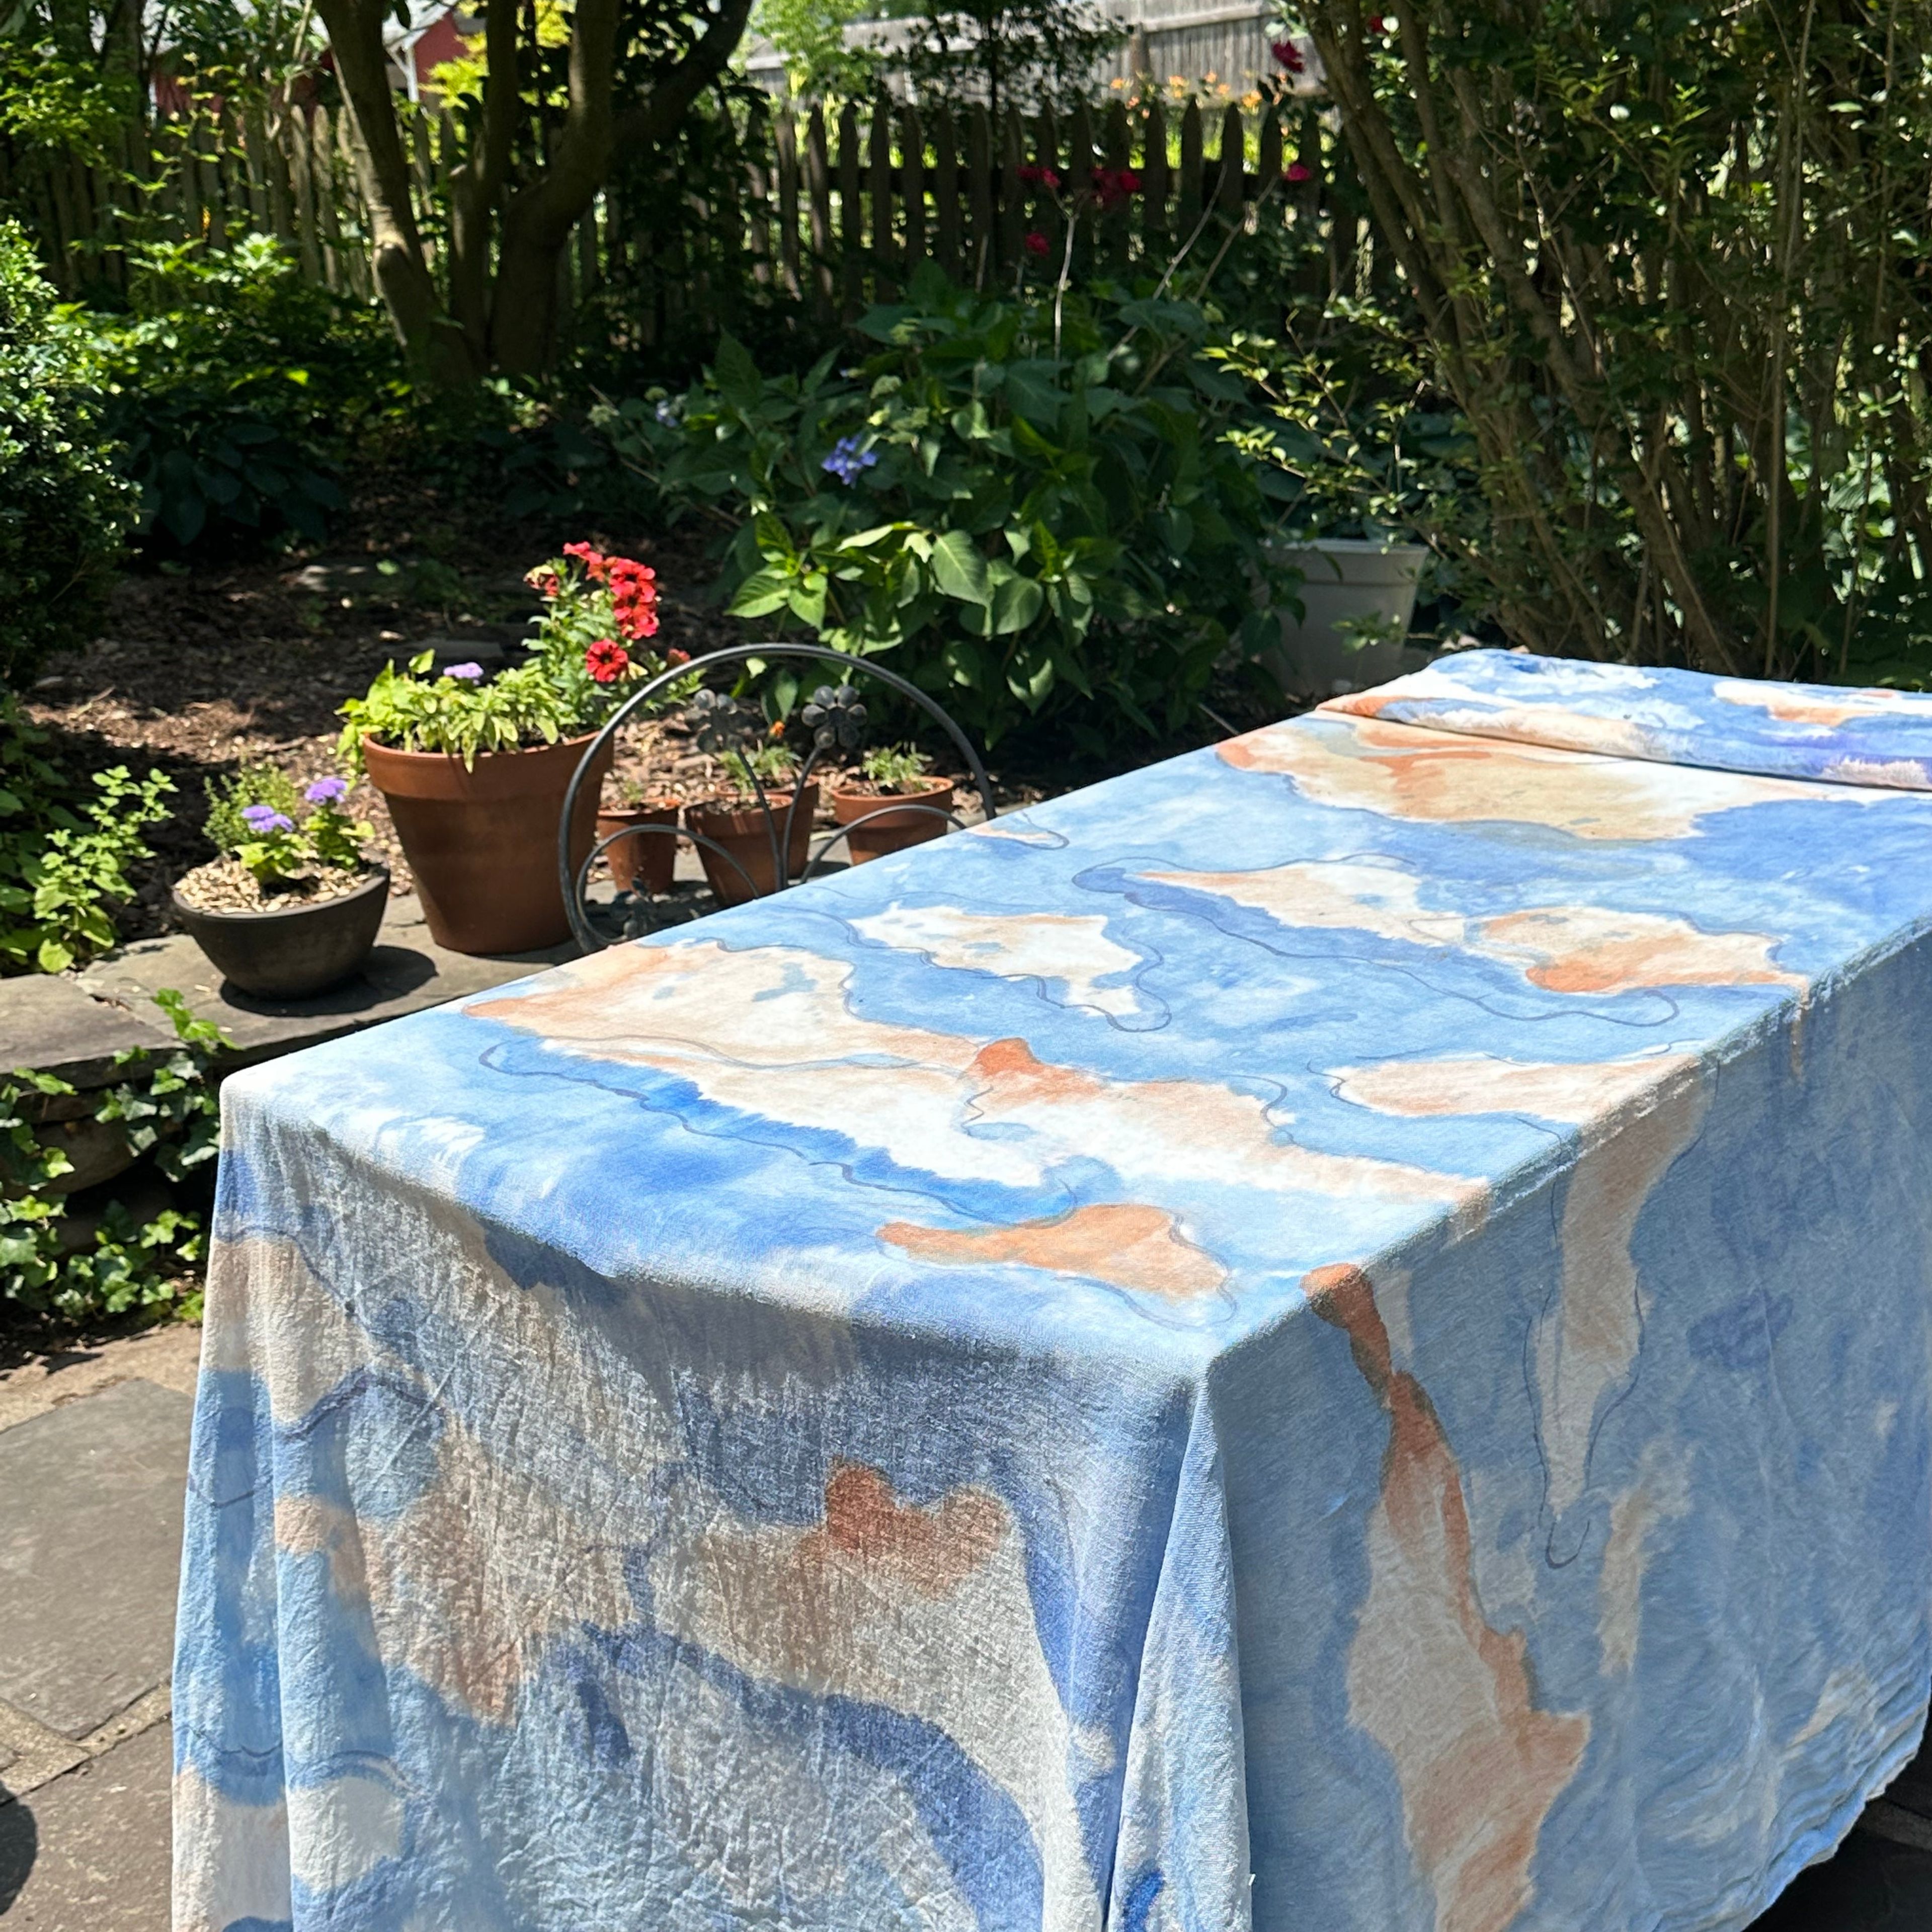 Evening Clouds - Hand Painted Tablecloth